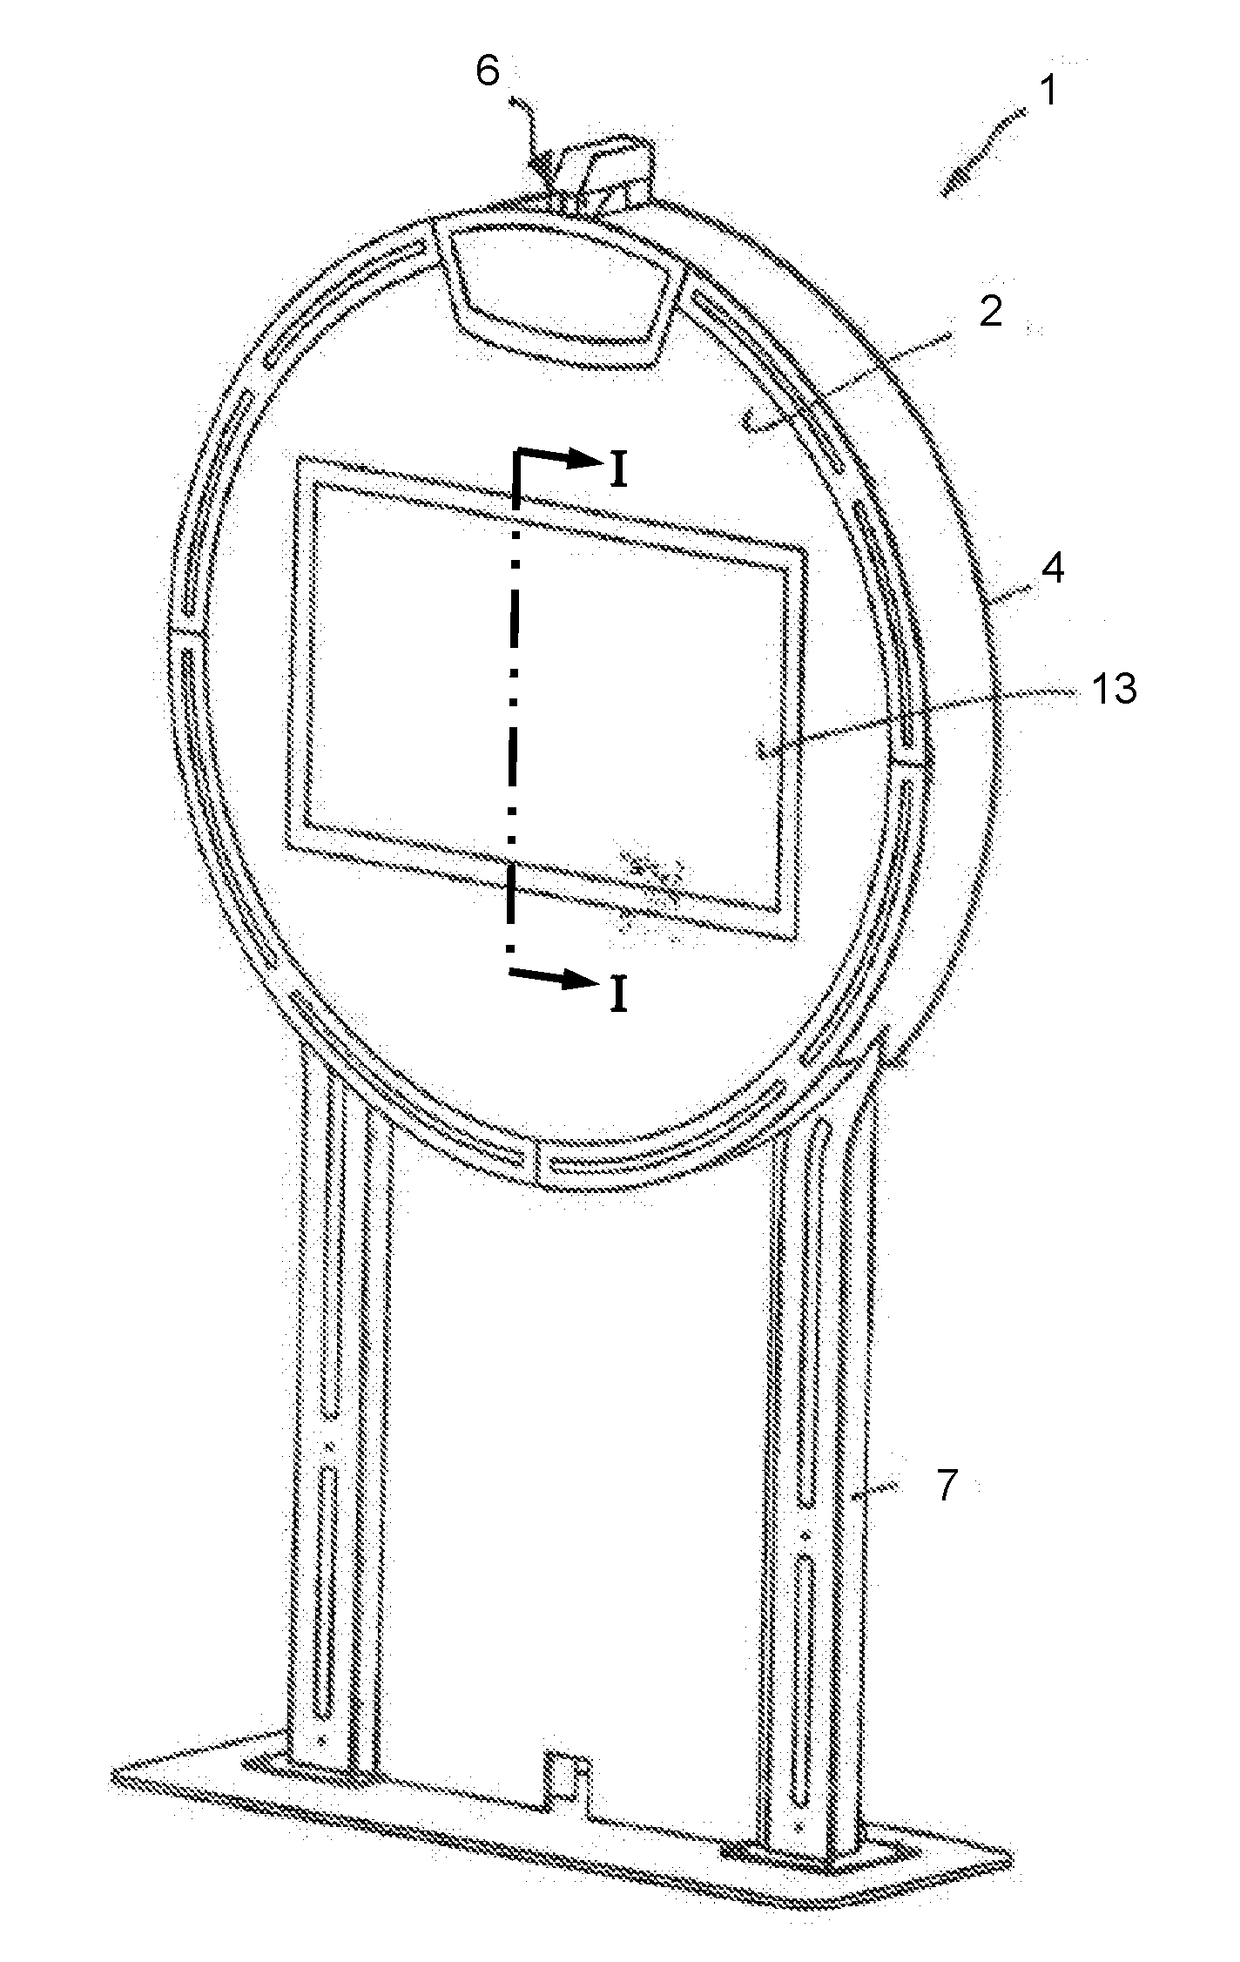 Gaming device comprising a rotatable game wheel